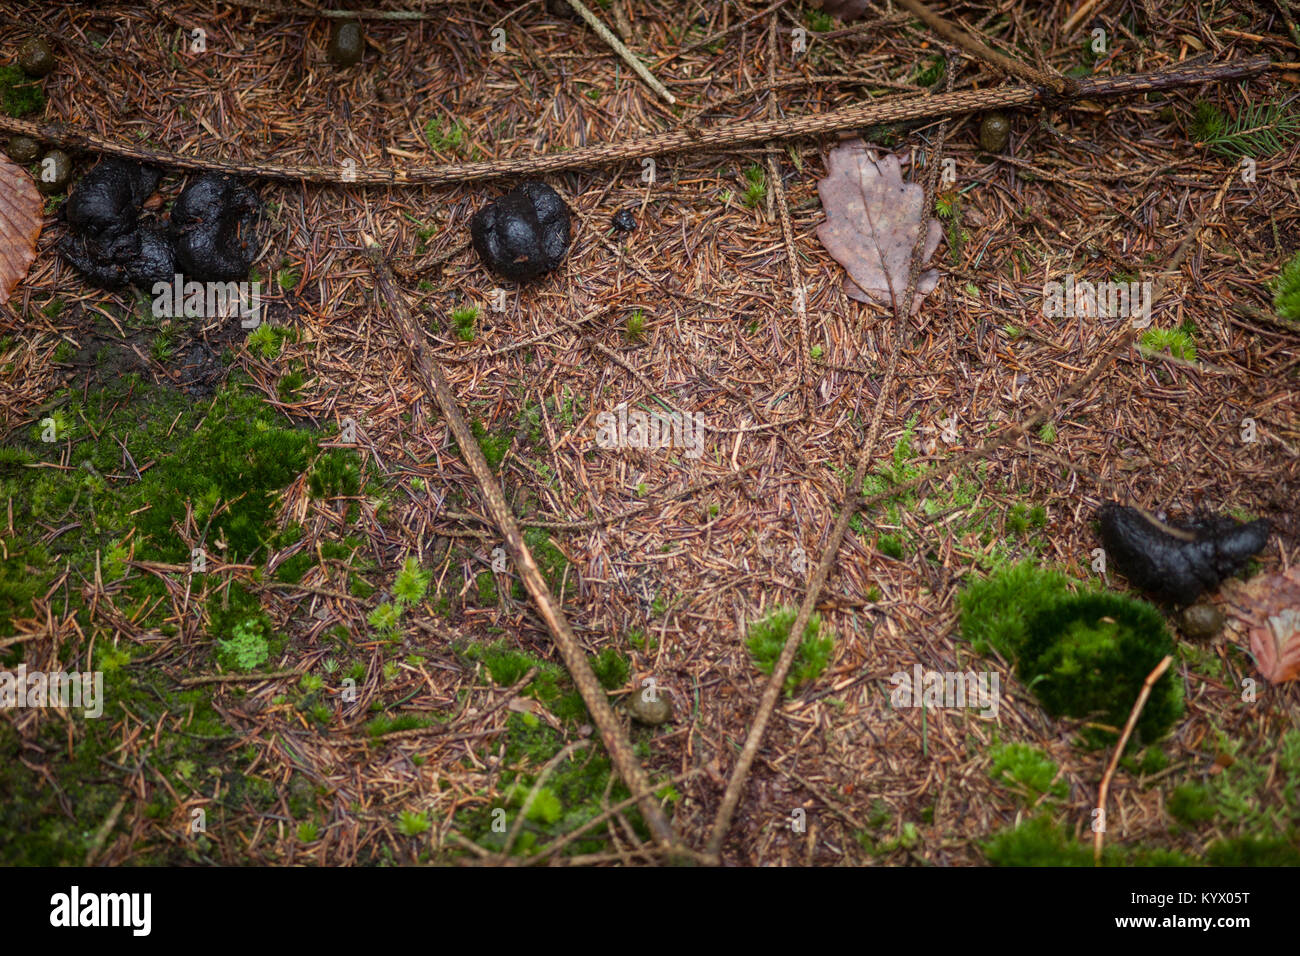 Wild small feces of wild animal in the forest Stock Photo